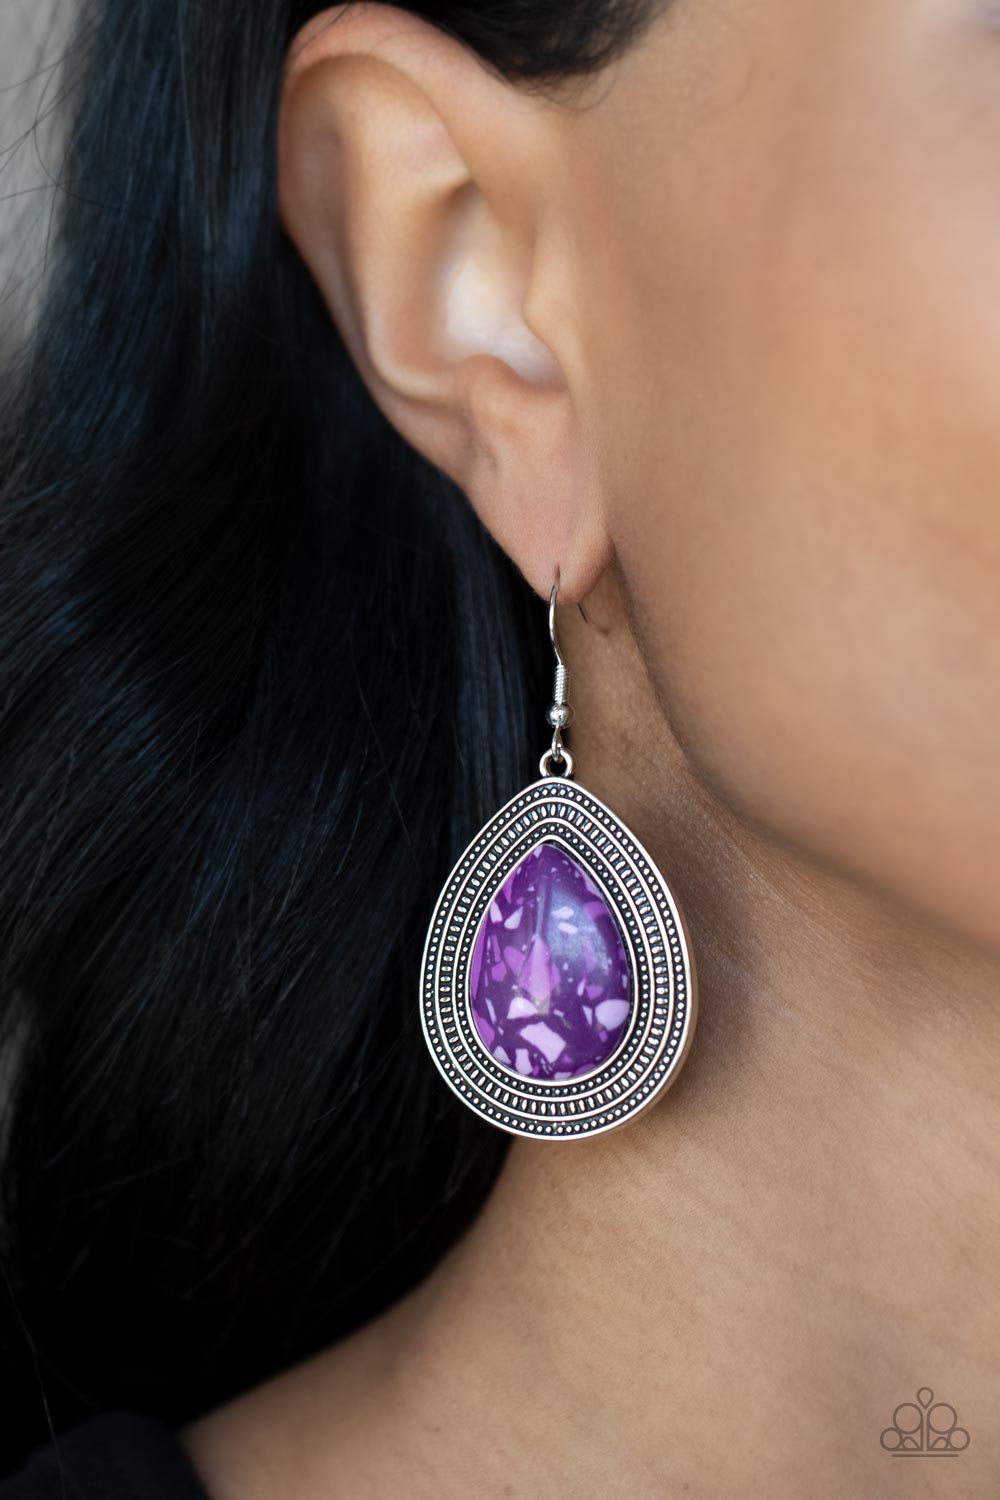 Terrazzo Tundra Purple Earring - Paparazzi Accessories  Featuring a colorful terrazzo pattern, a purple teardrop stone is pressed into the center of a silver frame studded and embossed in borders of tribal inspired textures. Earring attaches to a standard fishhook fitting.  Sold as one pair of earrings.